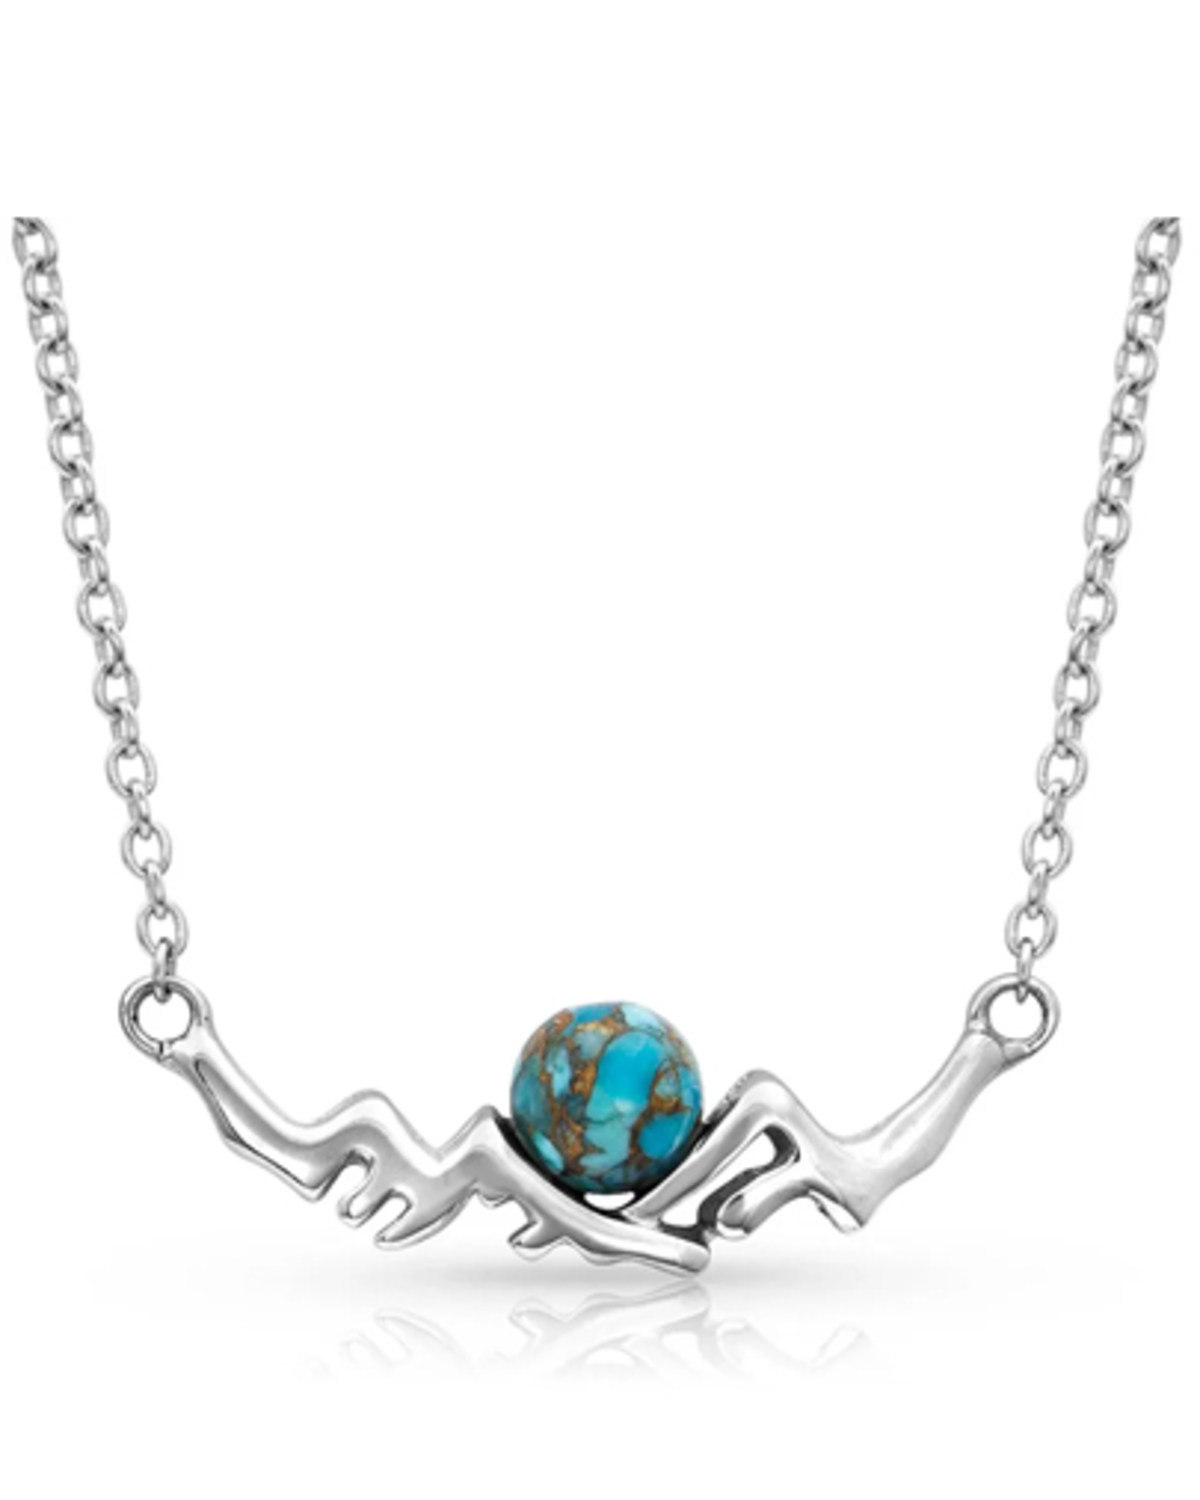 Montana Silversmiths Women's Pursue The Wild Another Mountain Turquoise Necklace